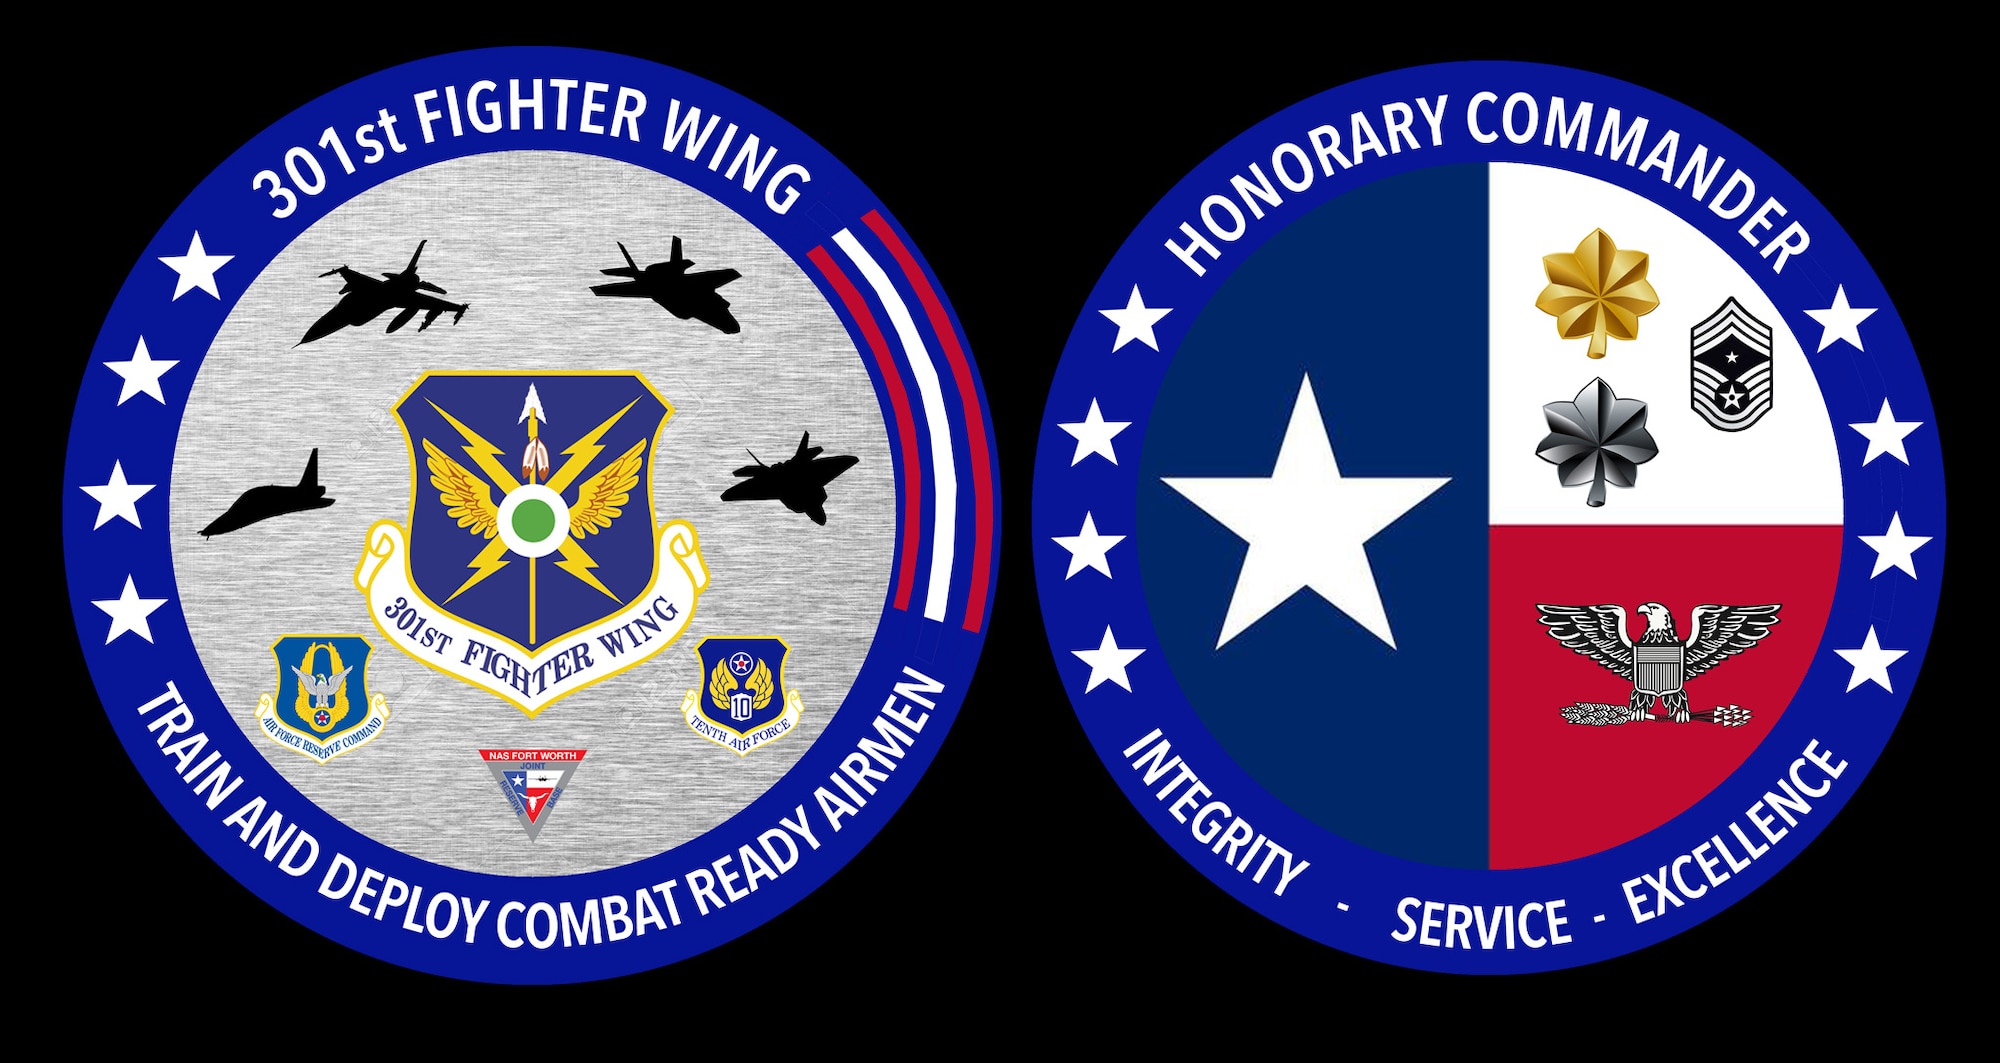 301st Fighter Wing Honorary Commanders Coin. (U.S. graphic by Capt. Jessica Gross and Jeremy Roman)